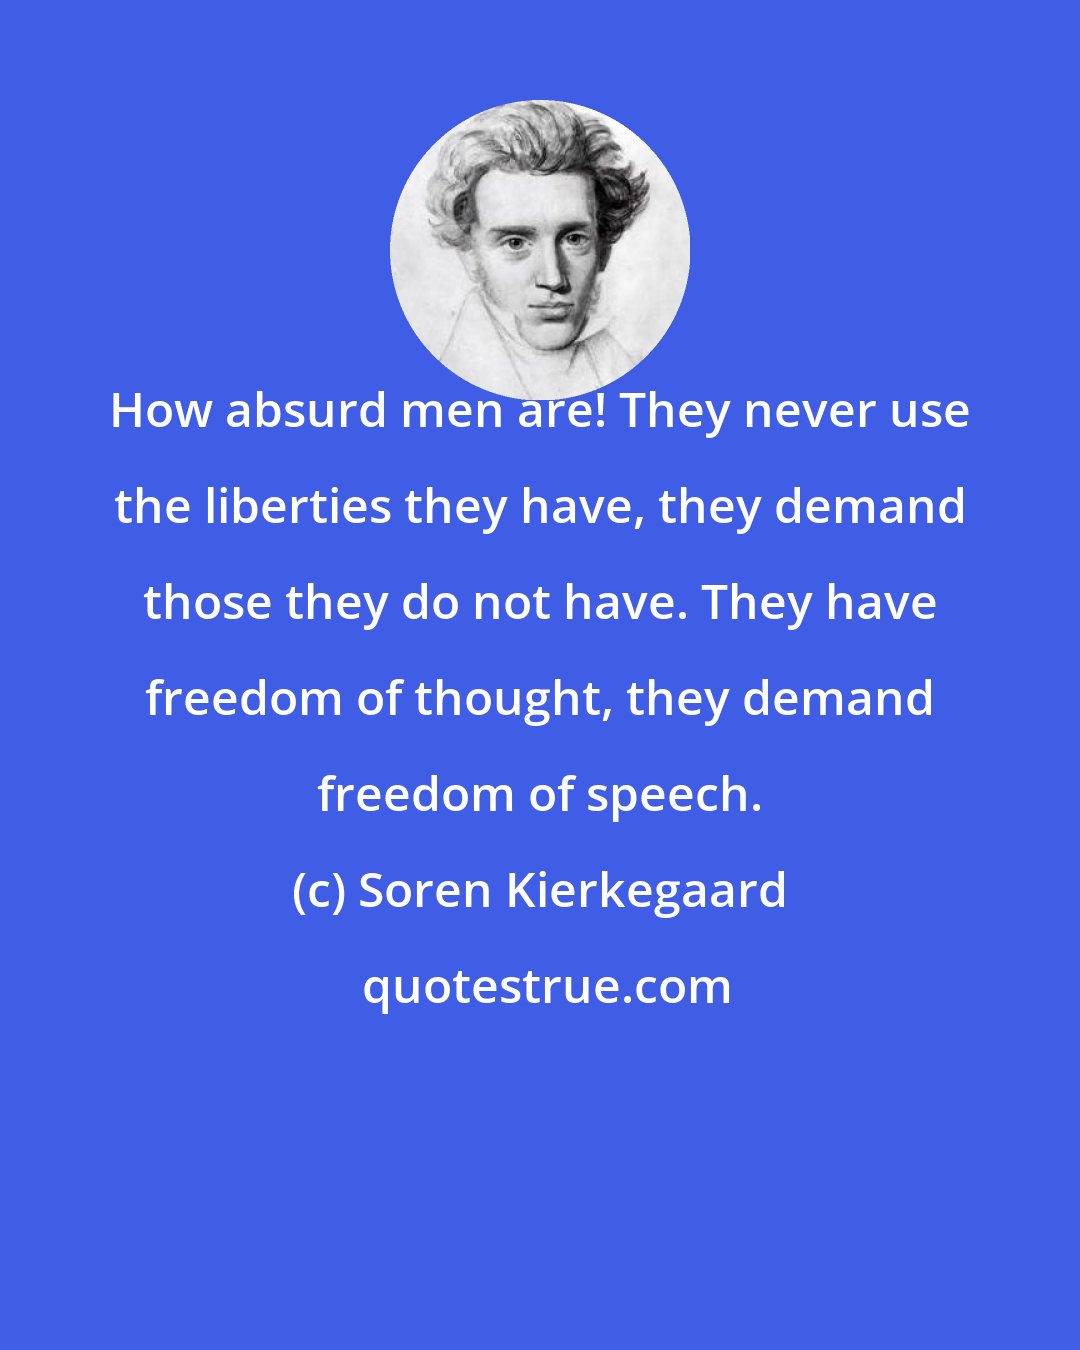 Soren Kierkegaard: How absurd men are! They never use the liberties they have, they demand those they do not have. They have freedom of thought, they demand freedom of speech.